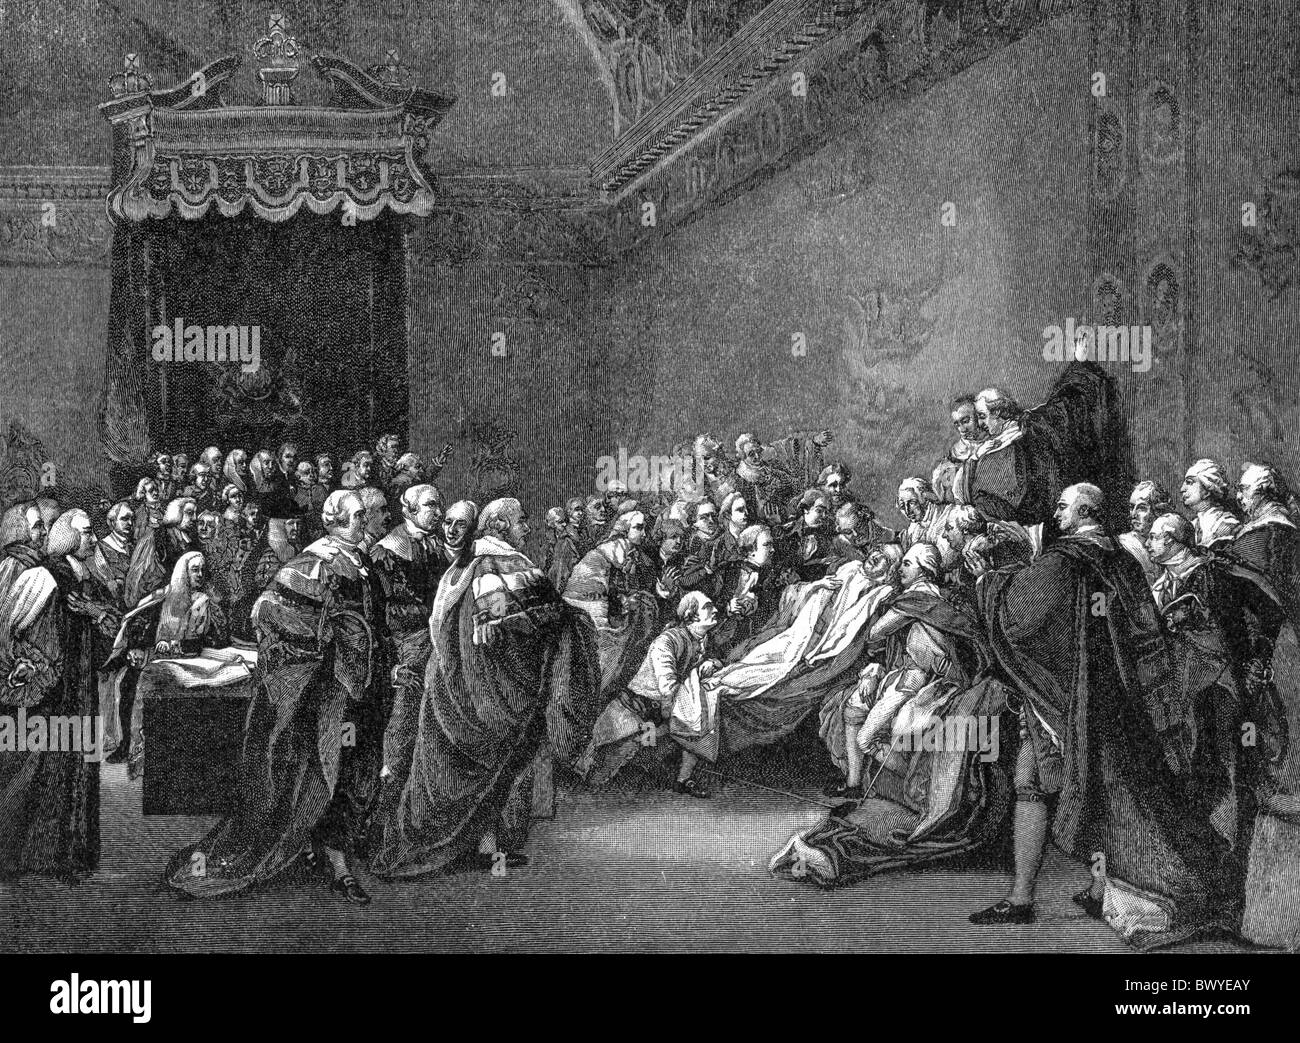 The Death of William Pitt the Elder, 1st Earl of Chatham, 1803; Black and White Illustration; Stock Photo